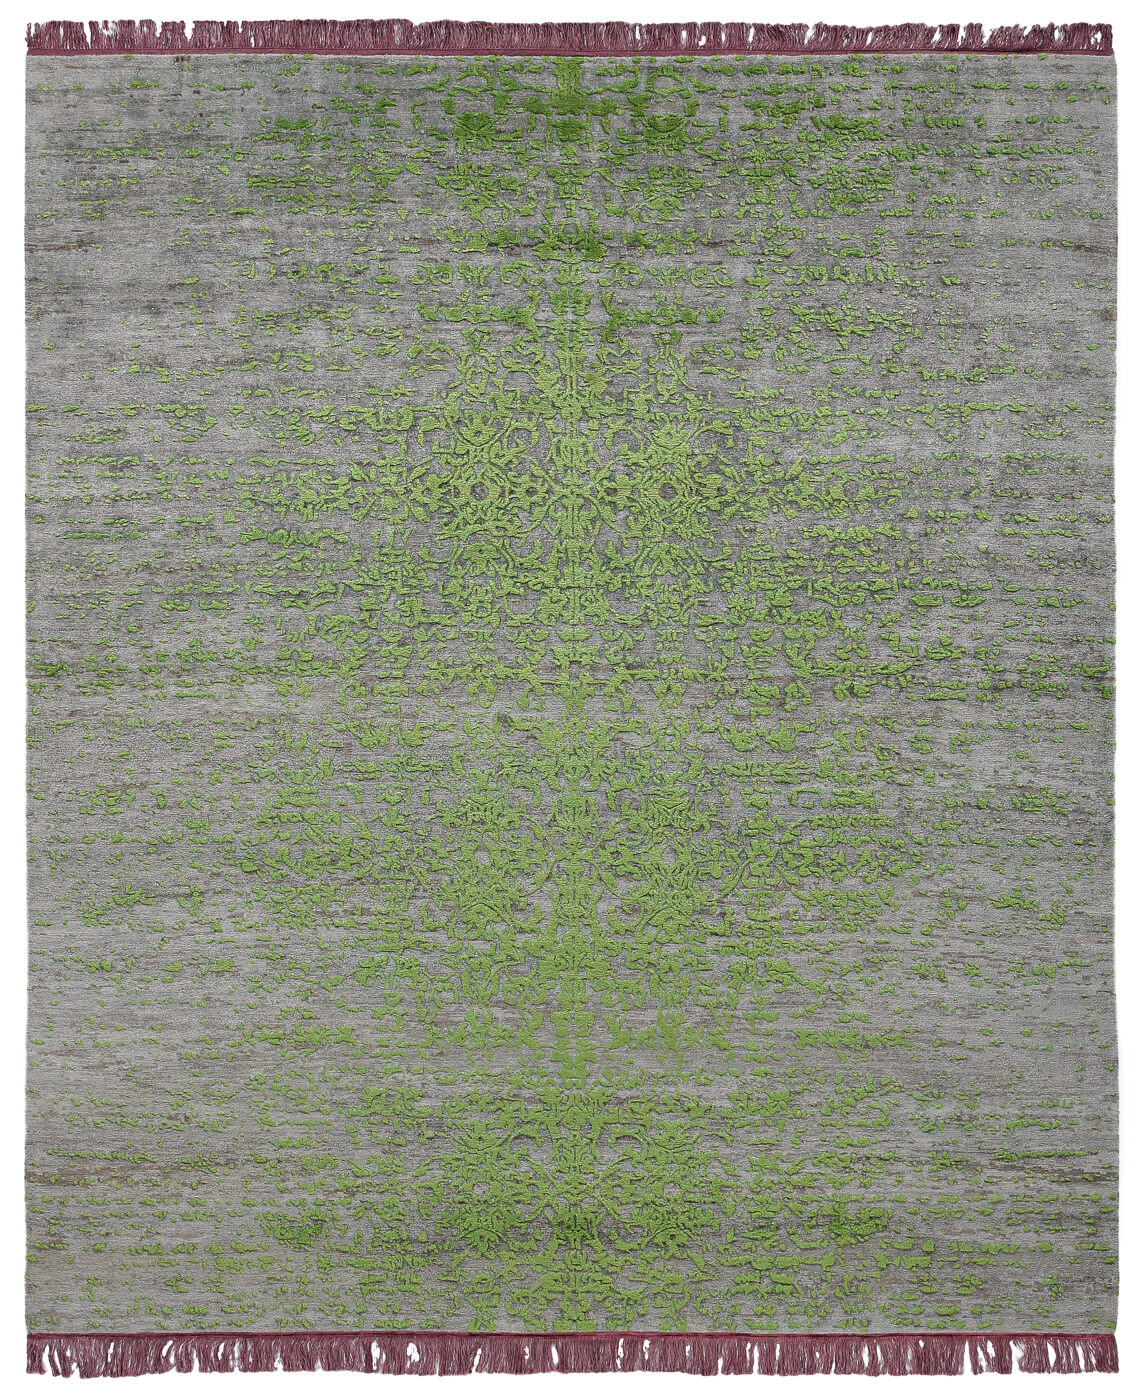 Hand-woven Vintage Style Luxury Rug ☞ Size: 300 x 400 cm